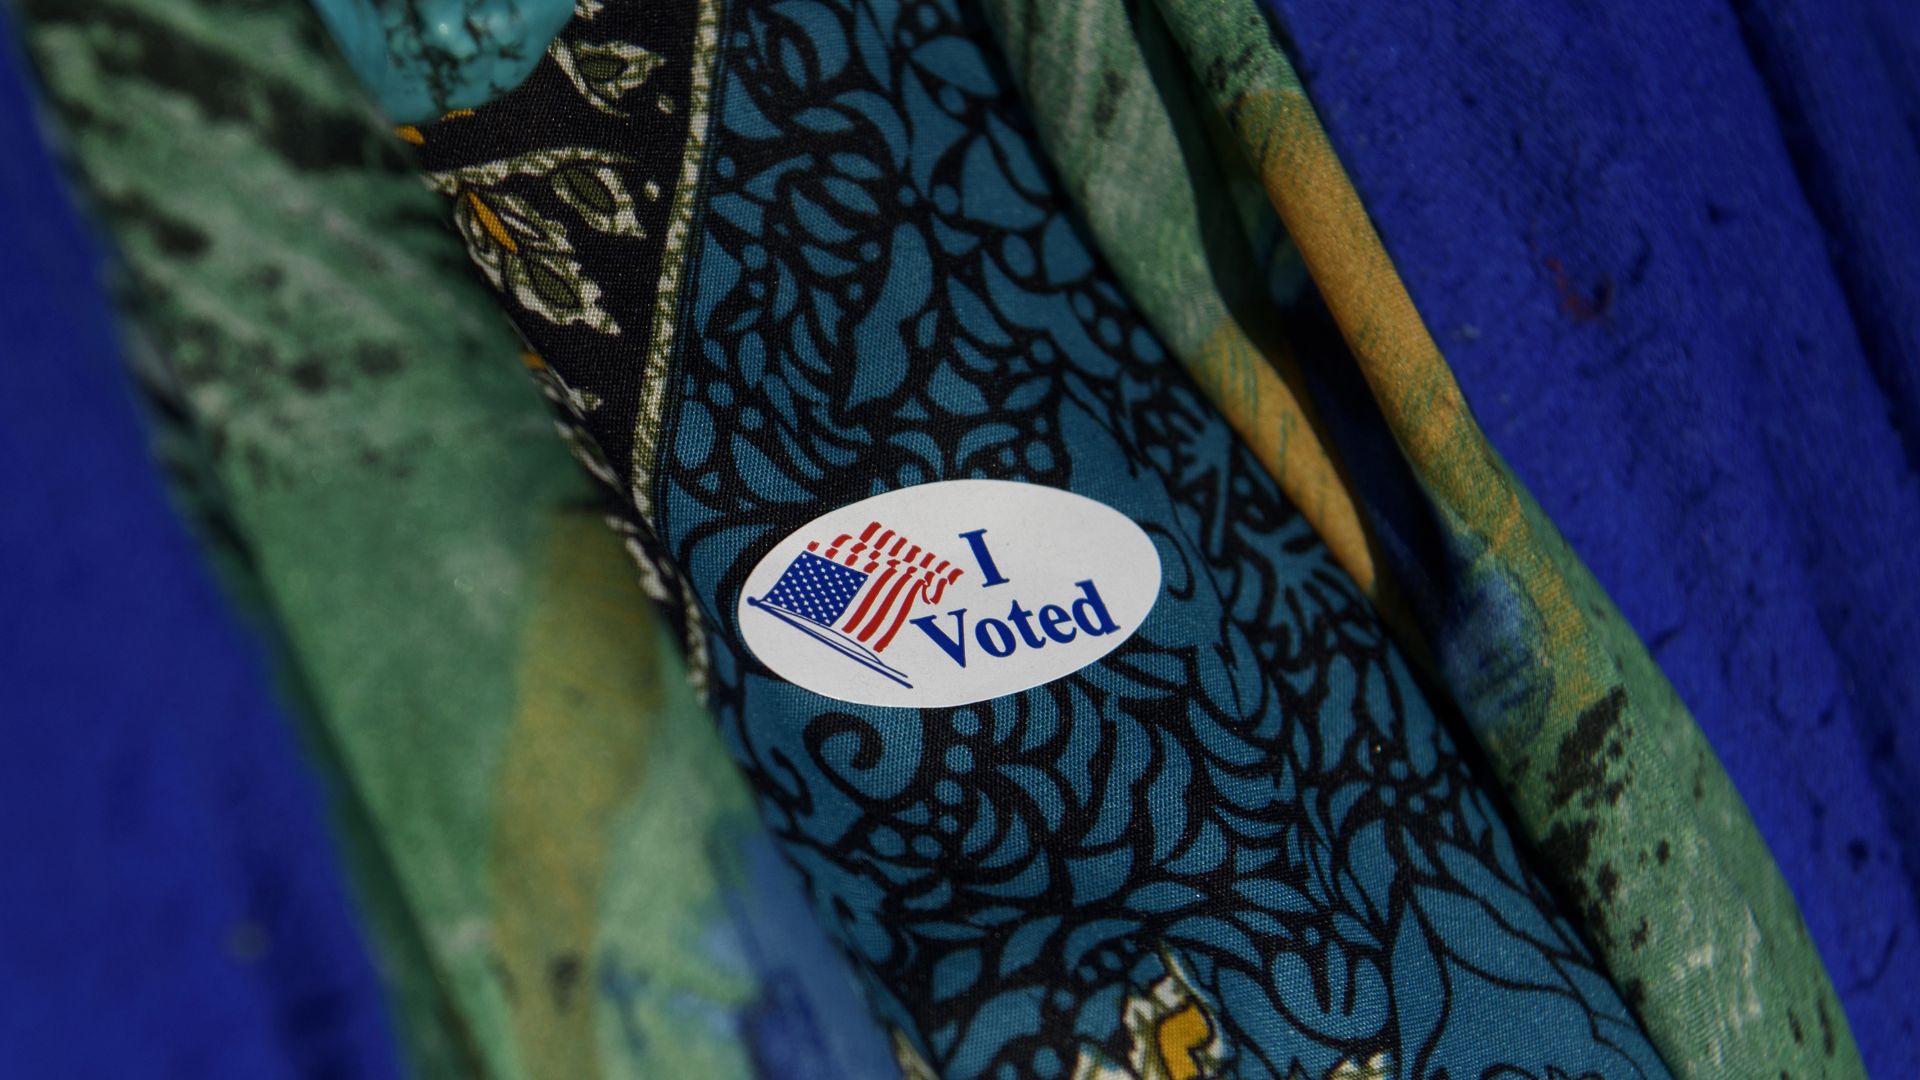 A close shot of a person wearing a blue and green top sports an "I Voted" sticker